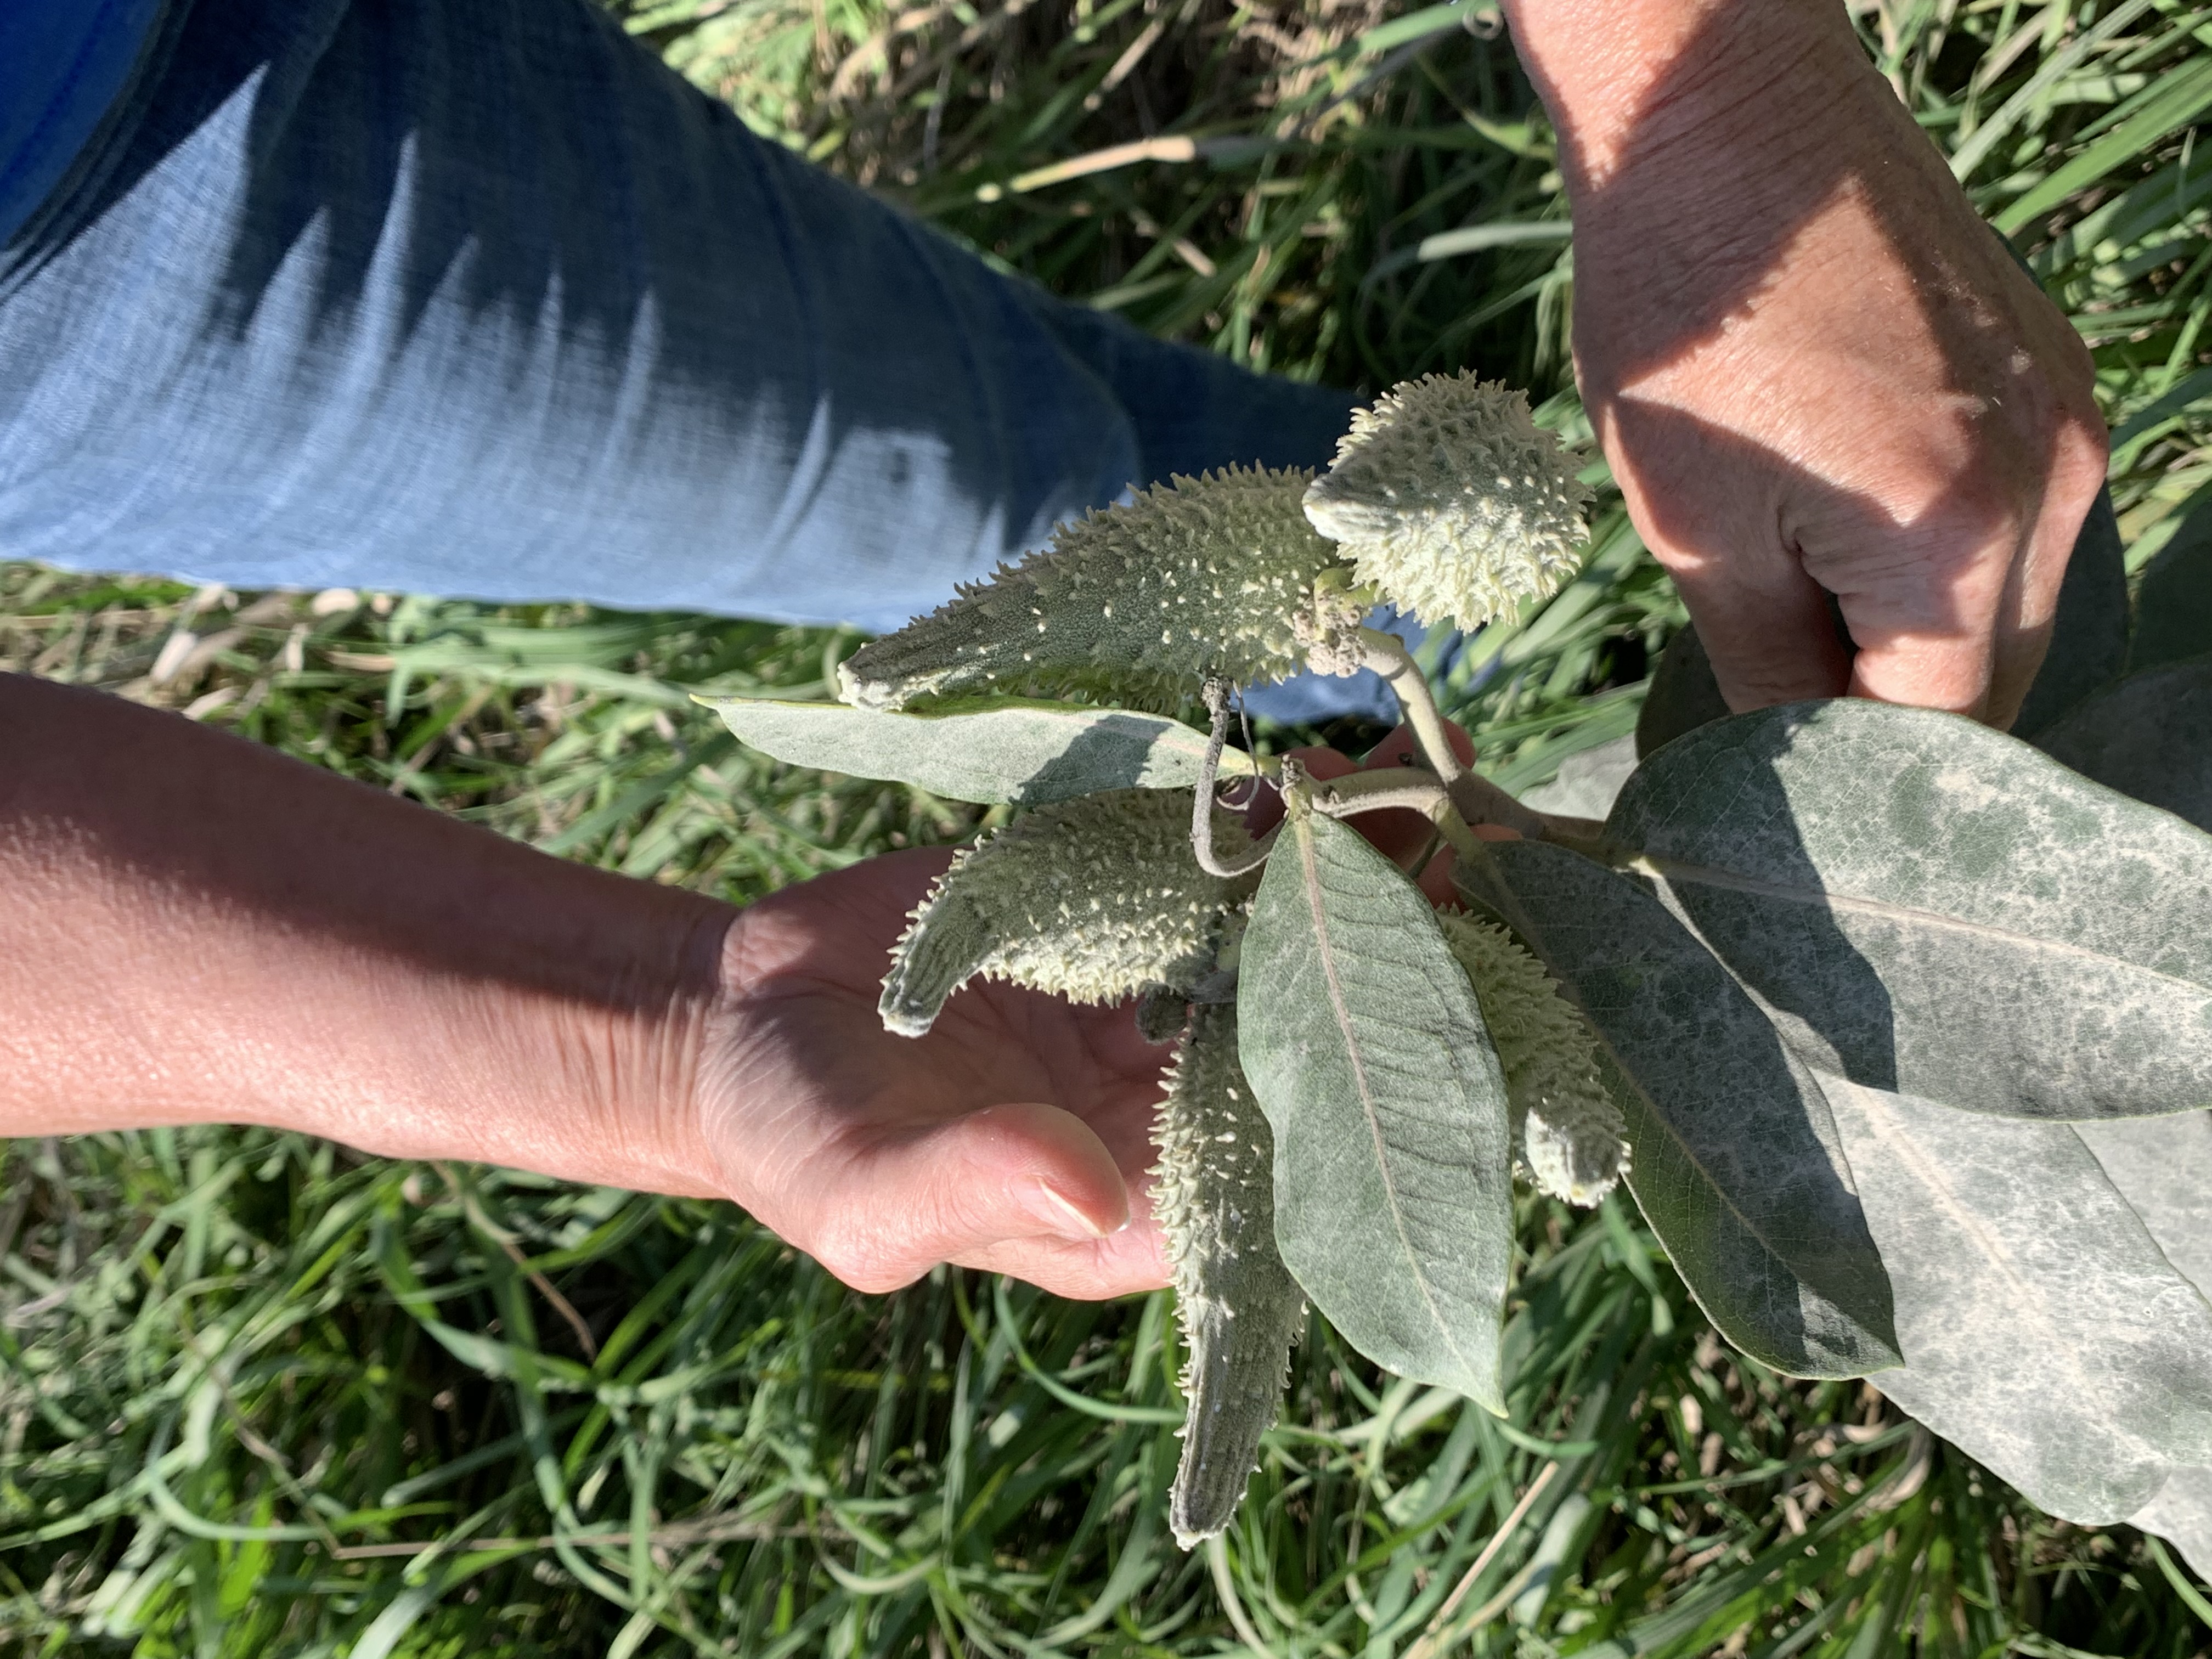 Karen's hands are shown as she inspects a dust-covered common milkweed plant in the road ditch next to Owl Acres. Five nubby seed pods are clustered at the top of the plant.